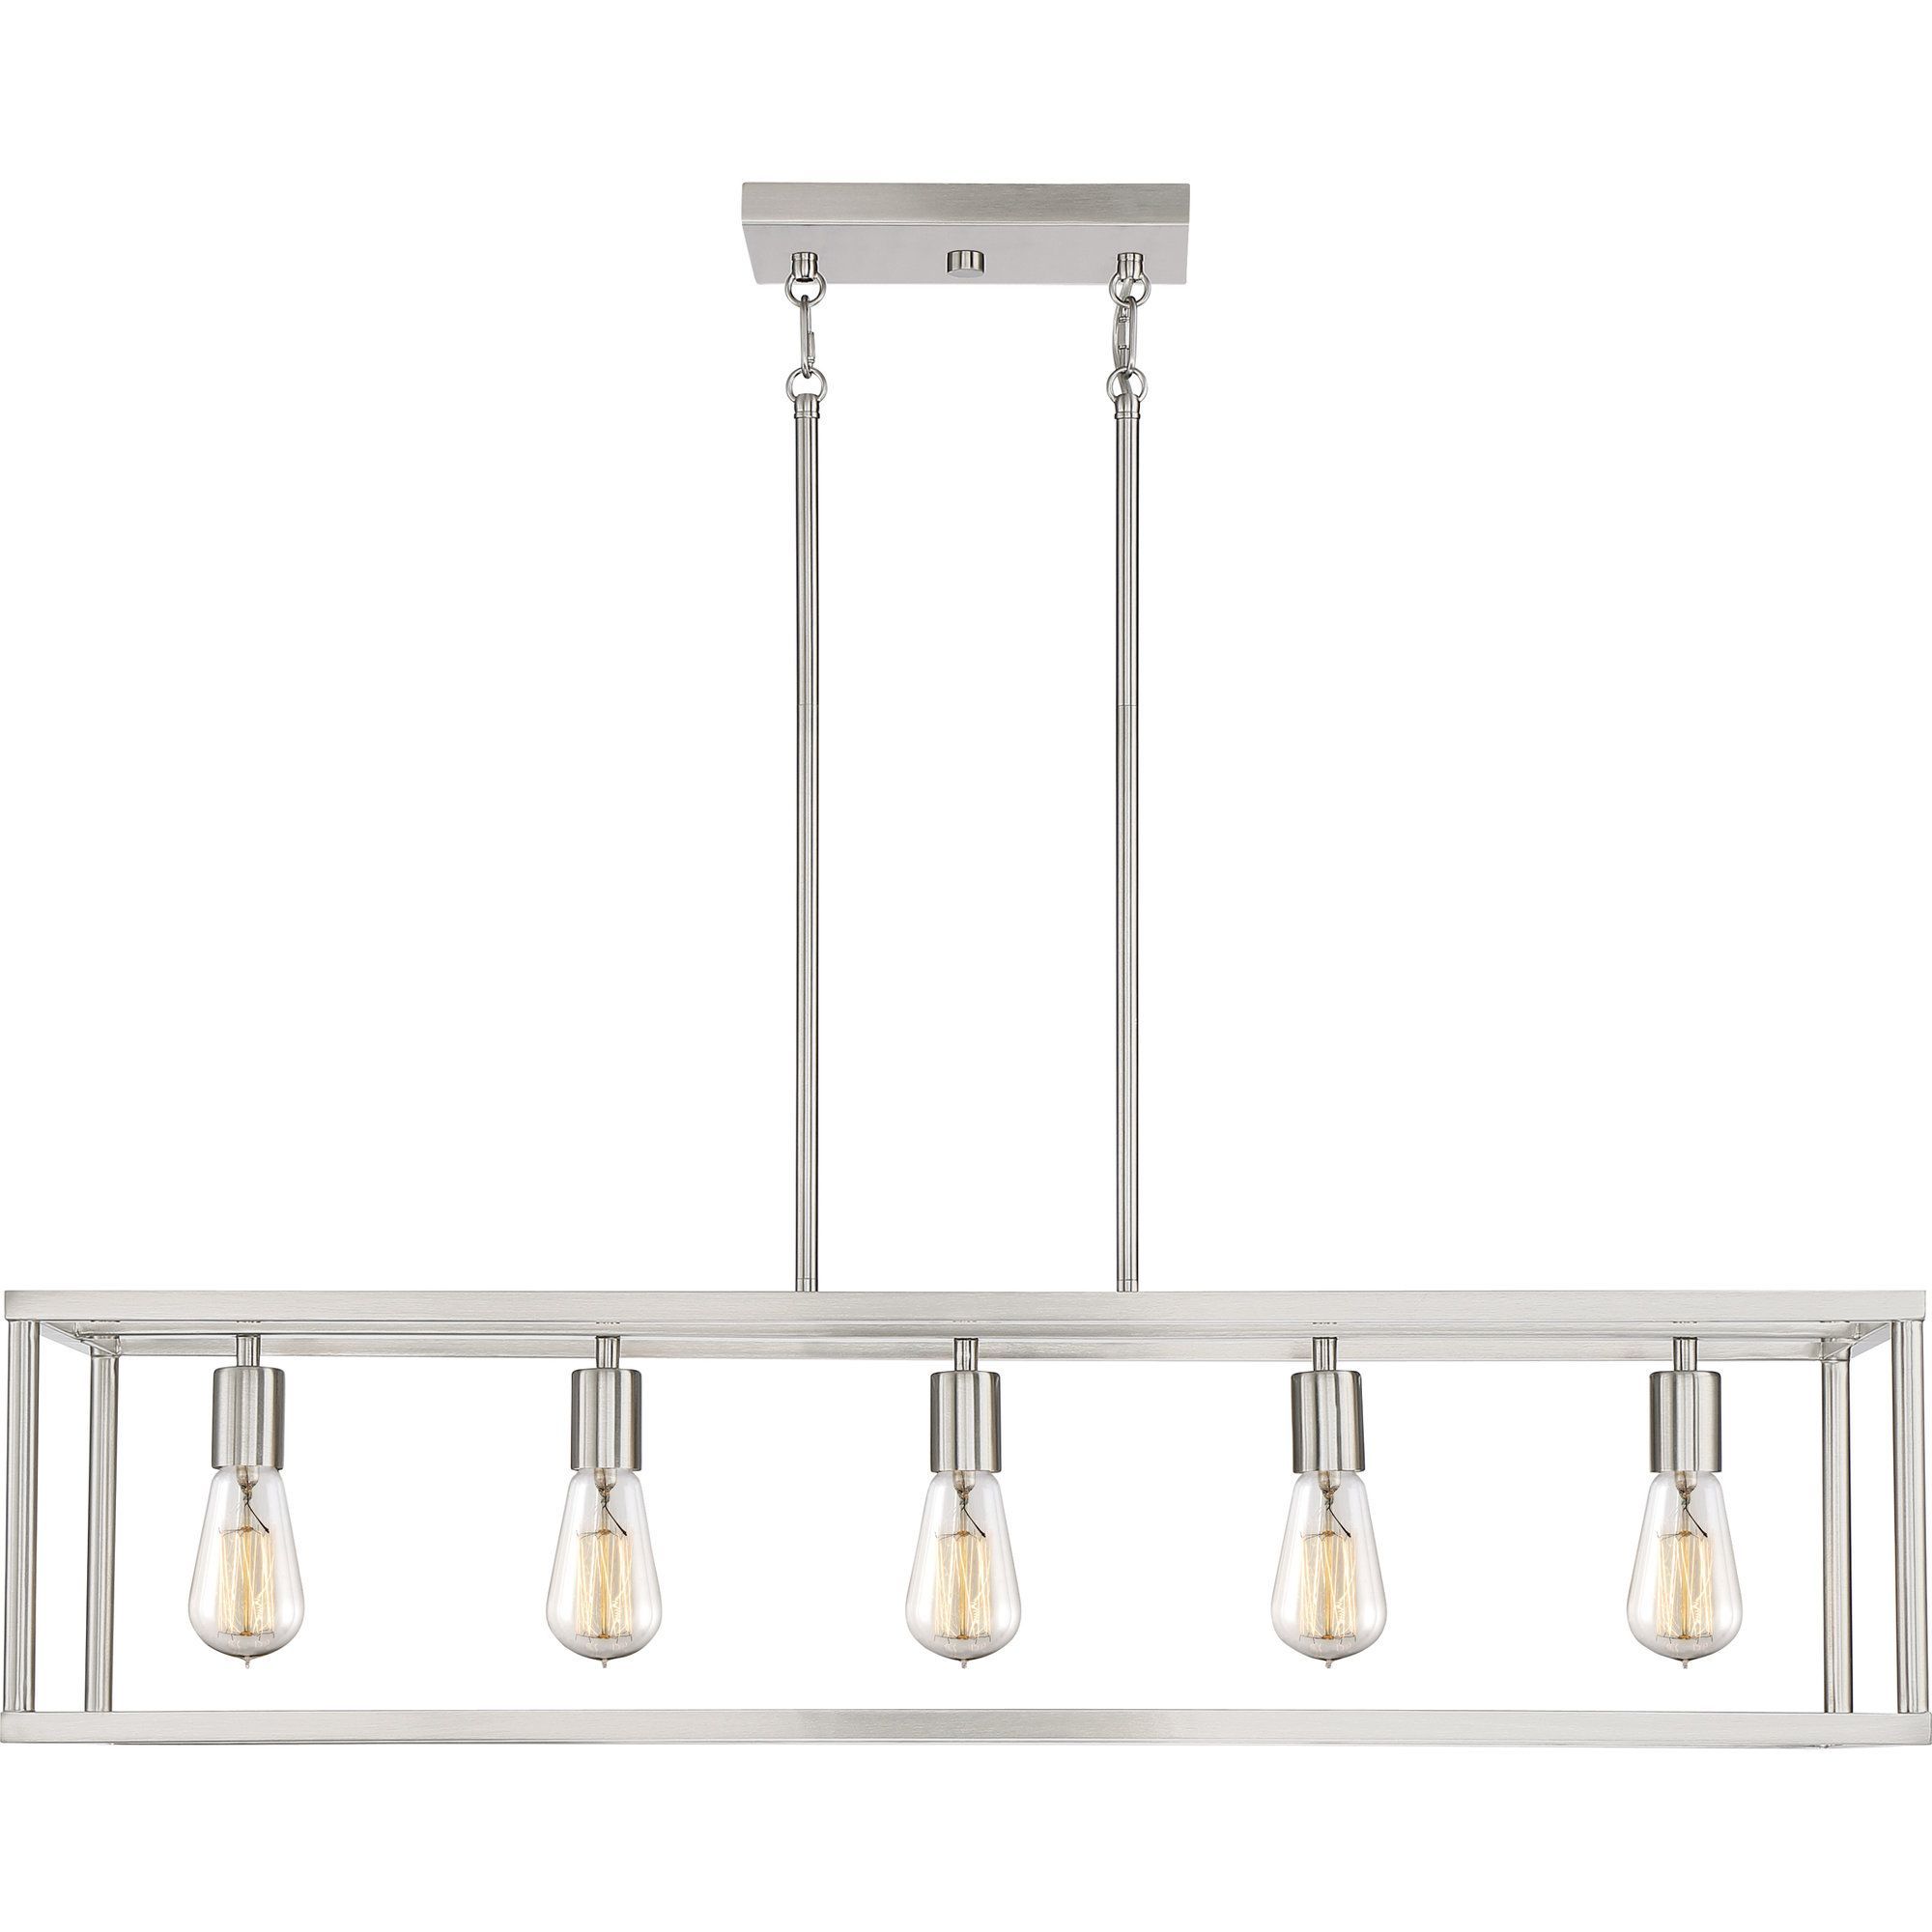 Sargeant 5 Light Kitchen Island Pendant In 2019 | Lighting With Regard To Jefferson 4 Light Kitchen Island Linear Pendants (View 7 of 30)